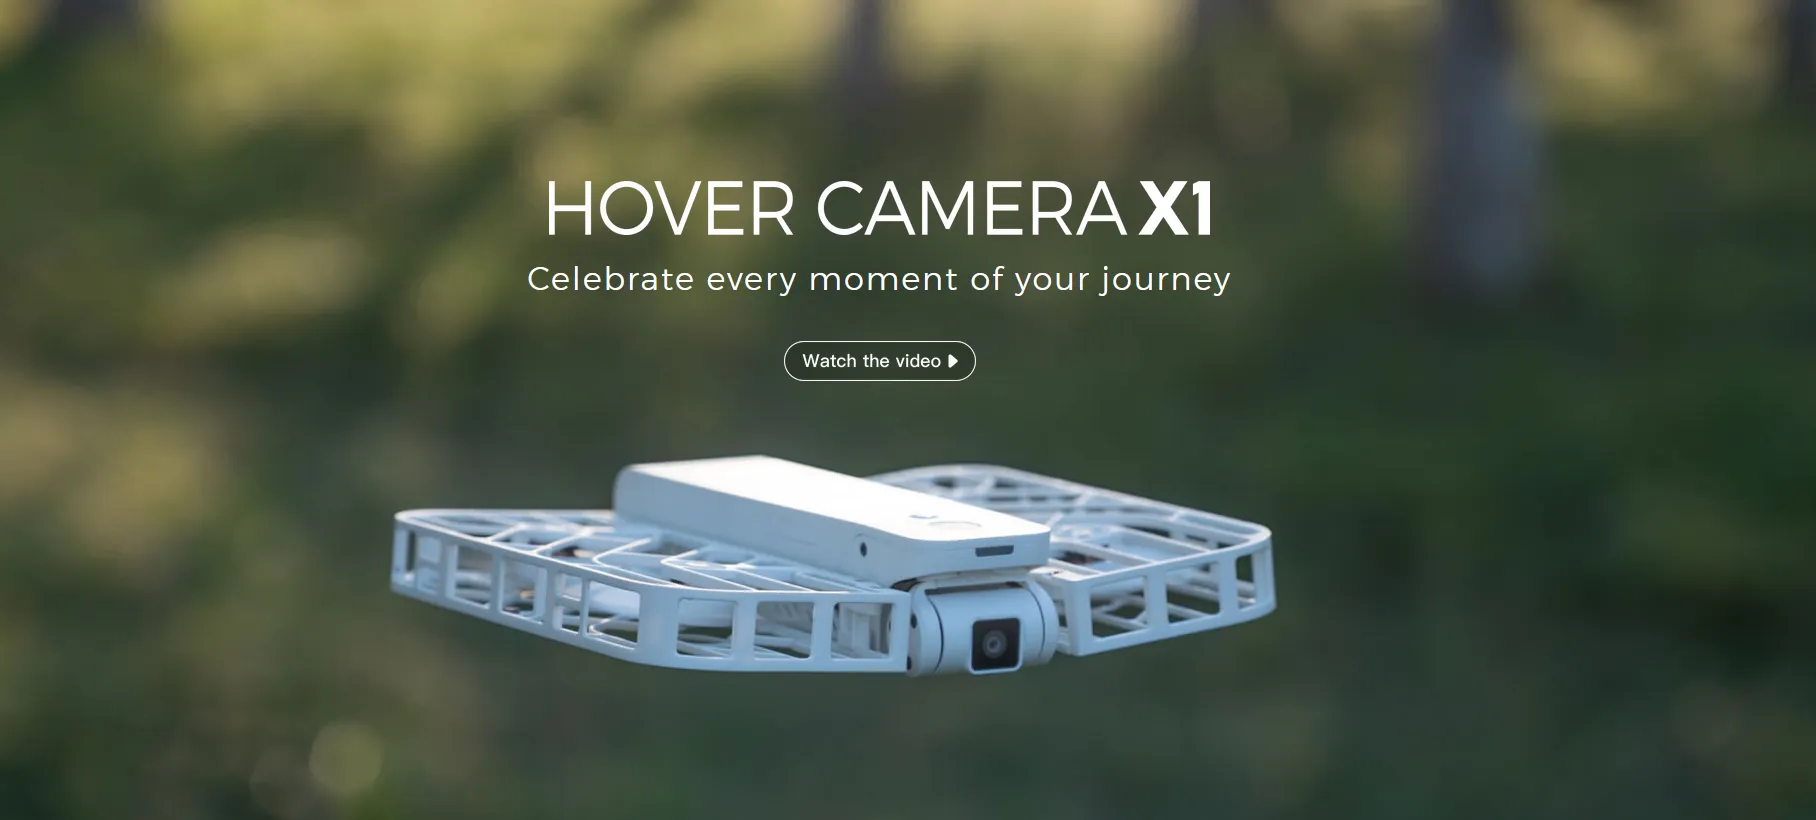 Hover Camera X1 HOVERAir X1 Flying Drone Camera Live Preview Selfie  Anti-Shake HD Drone Revolutionary Flying For Outdoor Travel